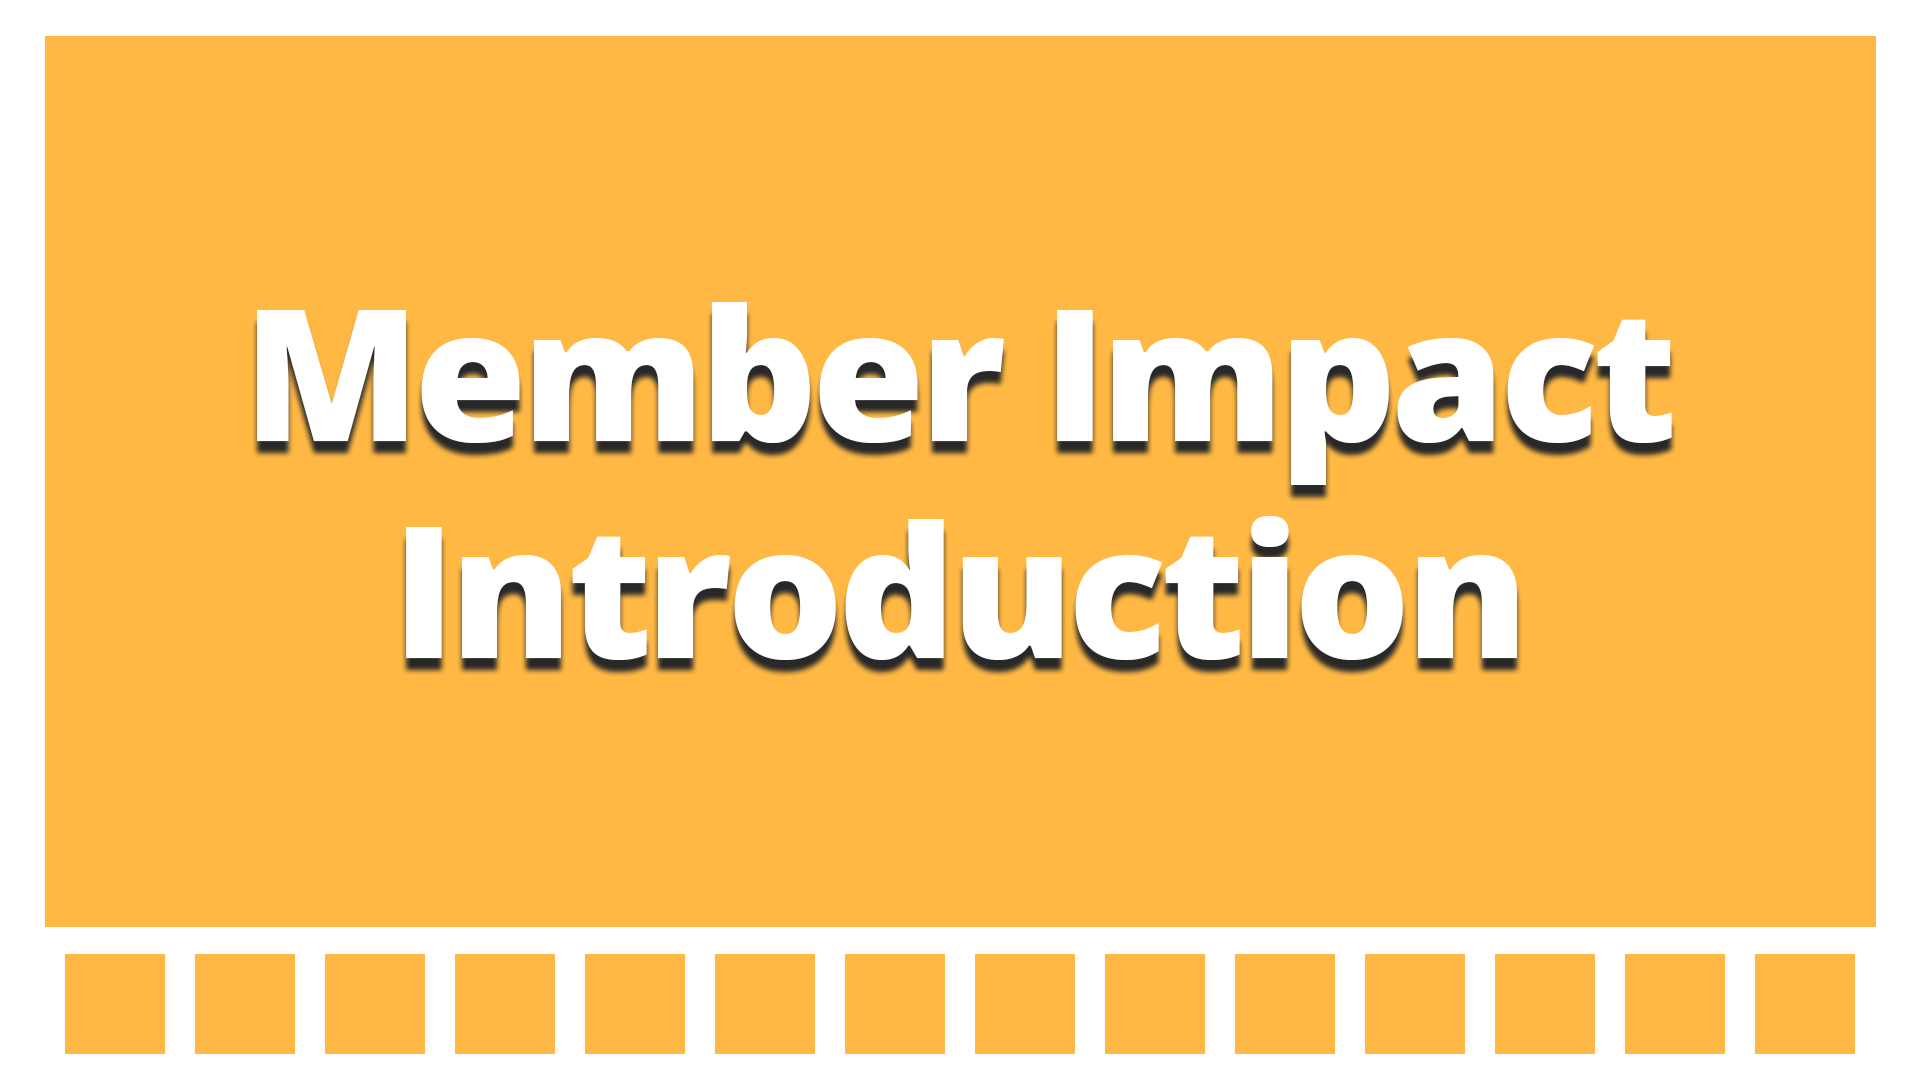 Member Impact Introduction